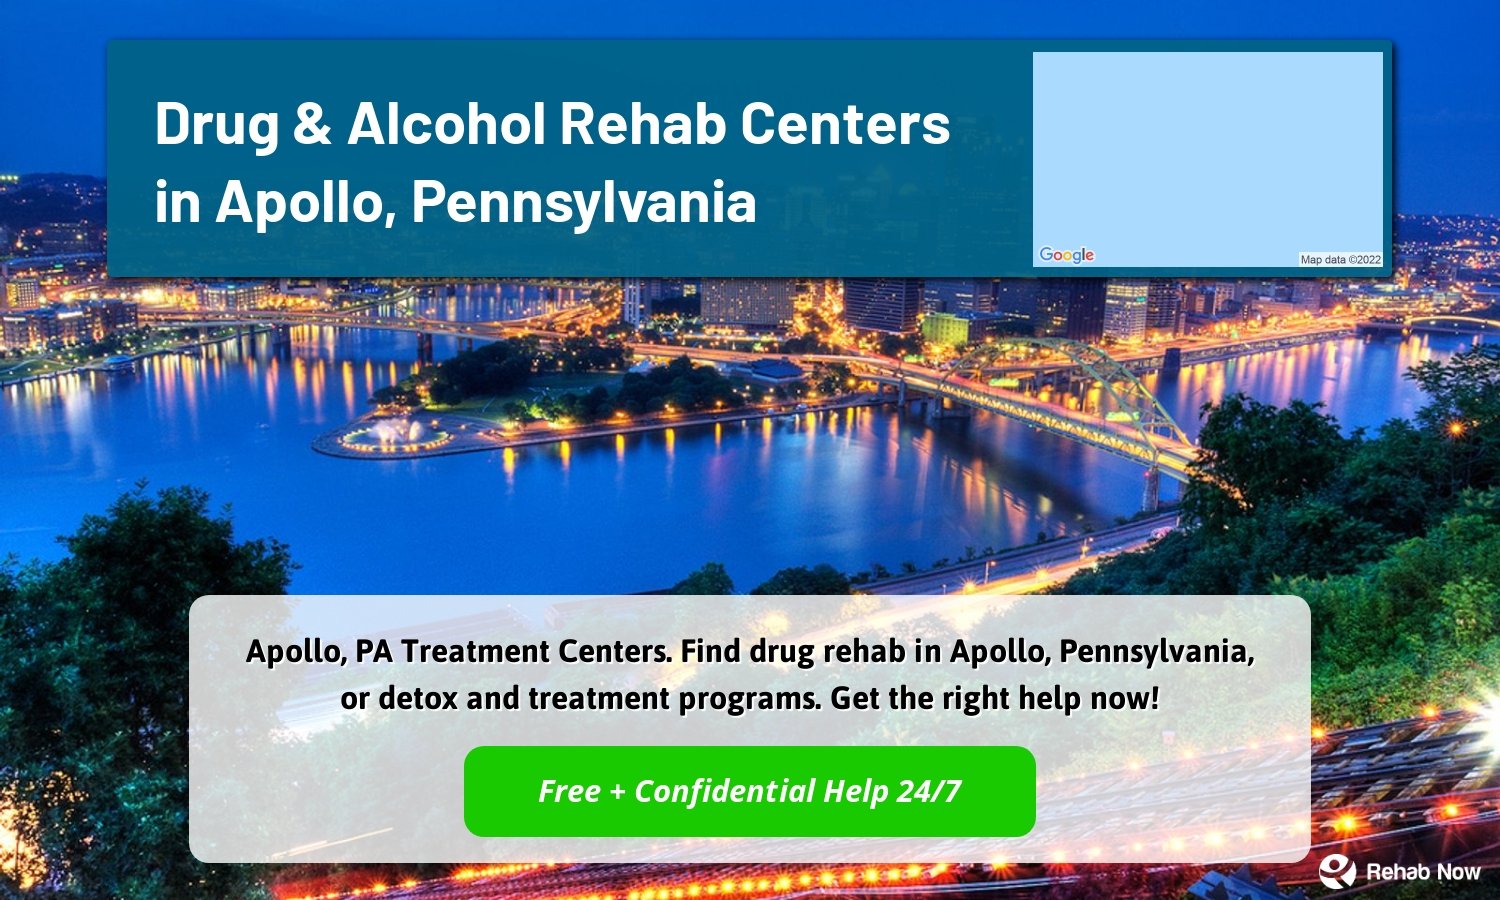 Apollo, PA Treatment Centers. Find drug rehab in Apollo, Pennsylvania, or detox and treatment programs. Get the right help now!